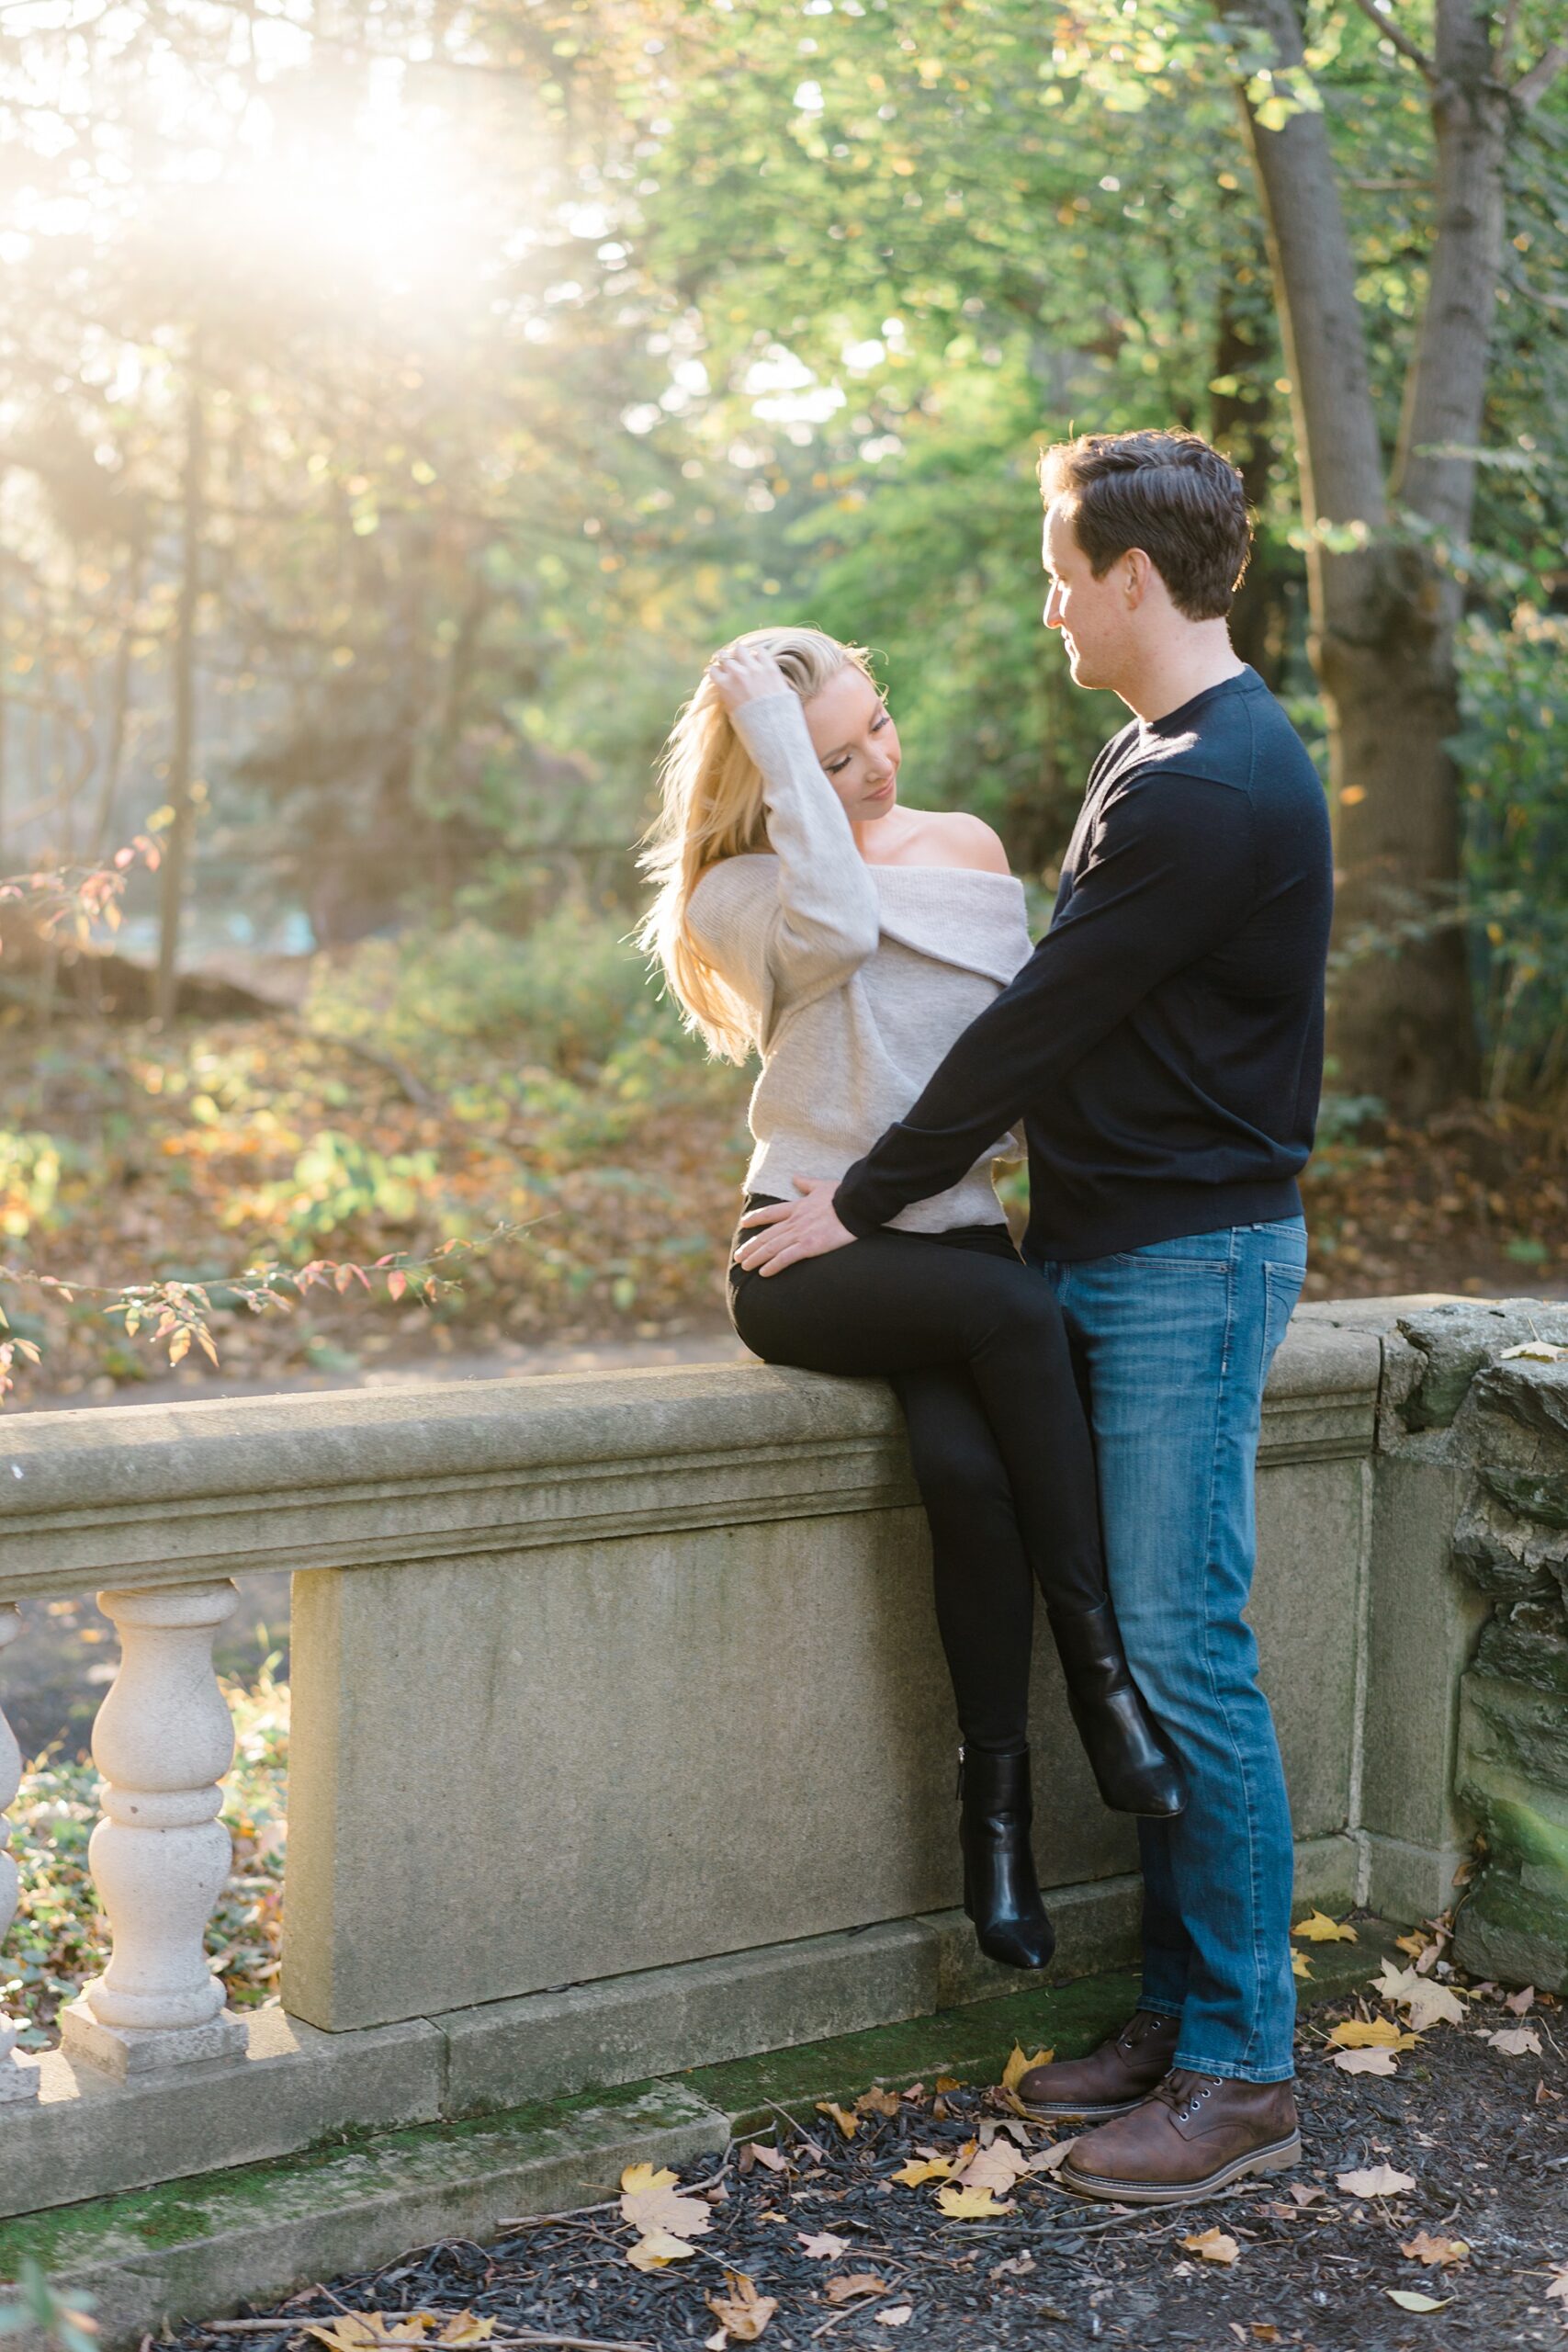 Scheduling a fall Engagement Session